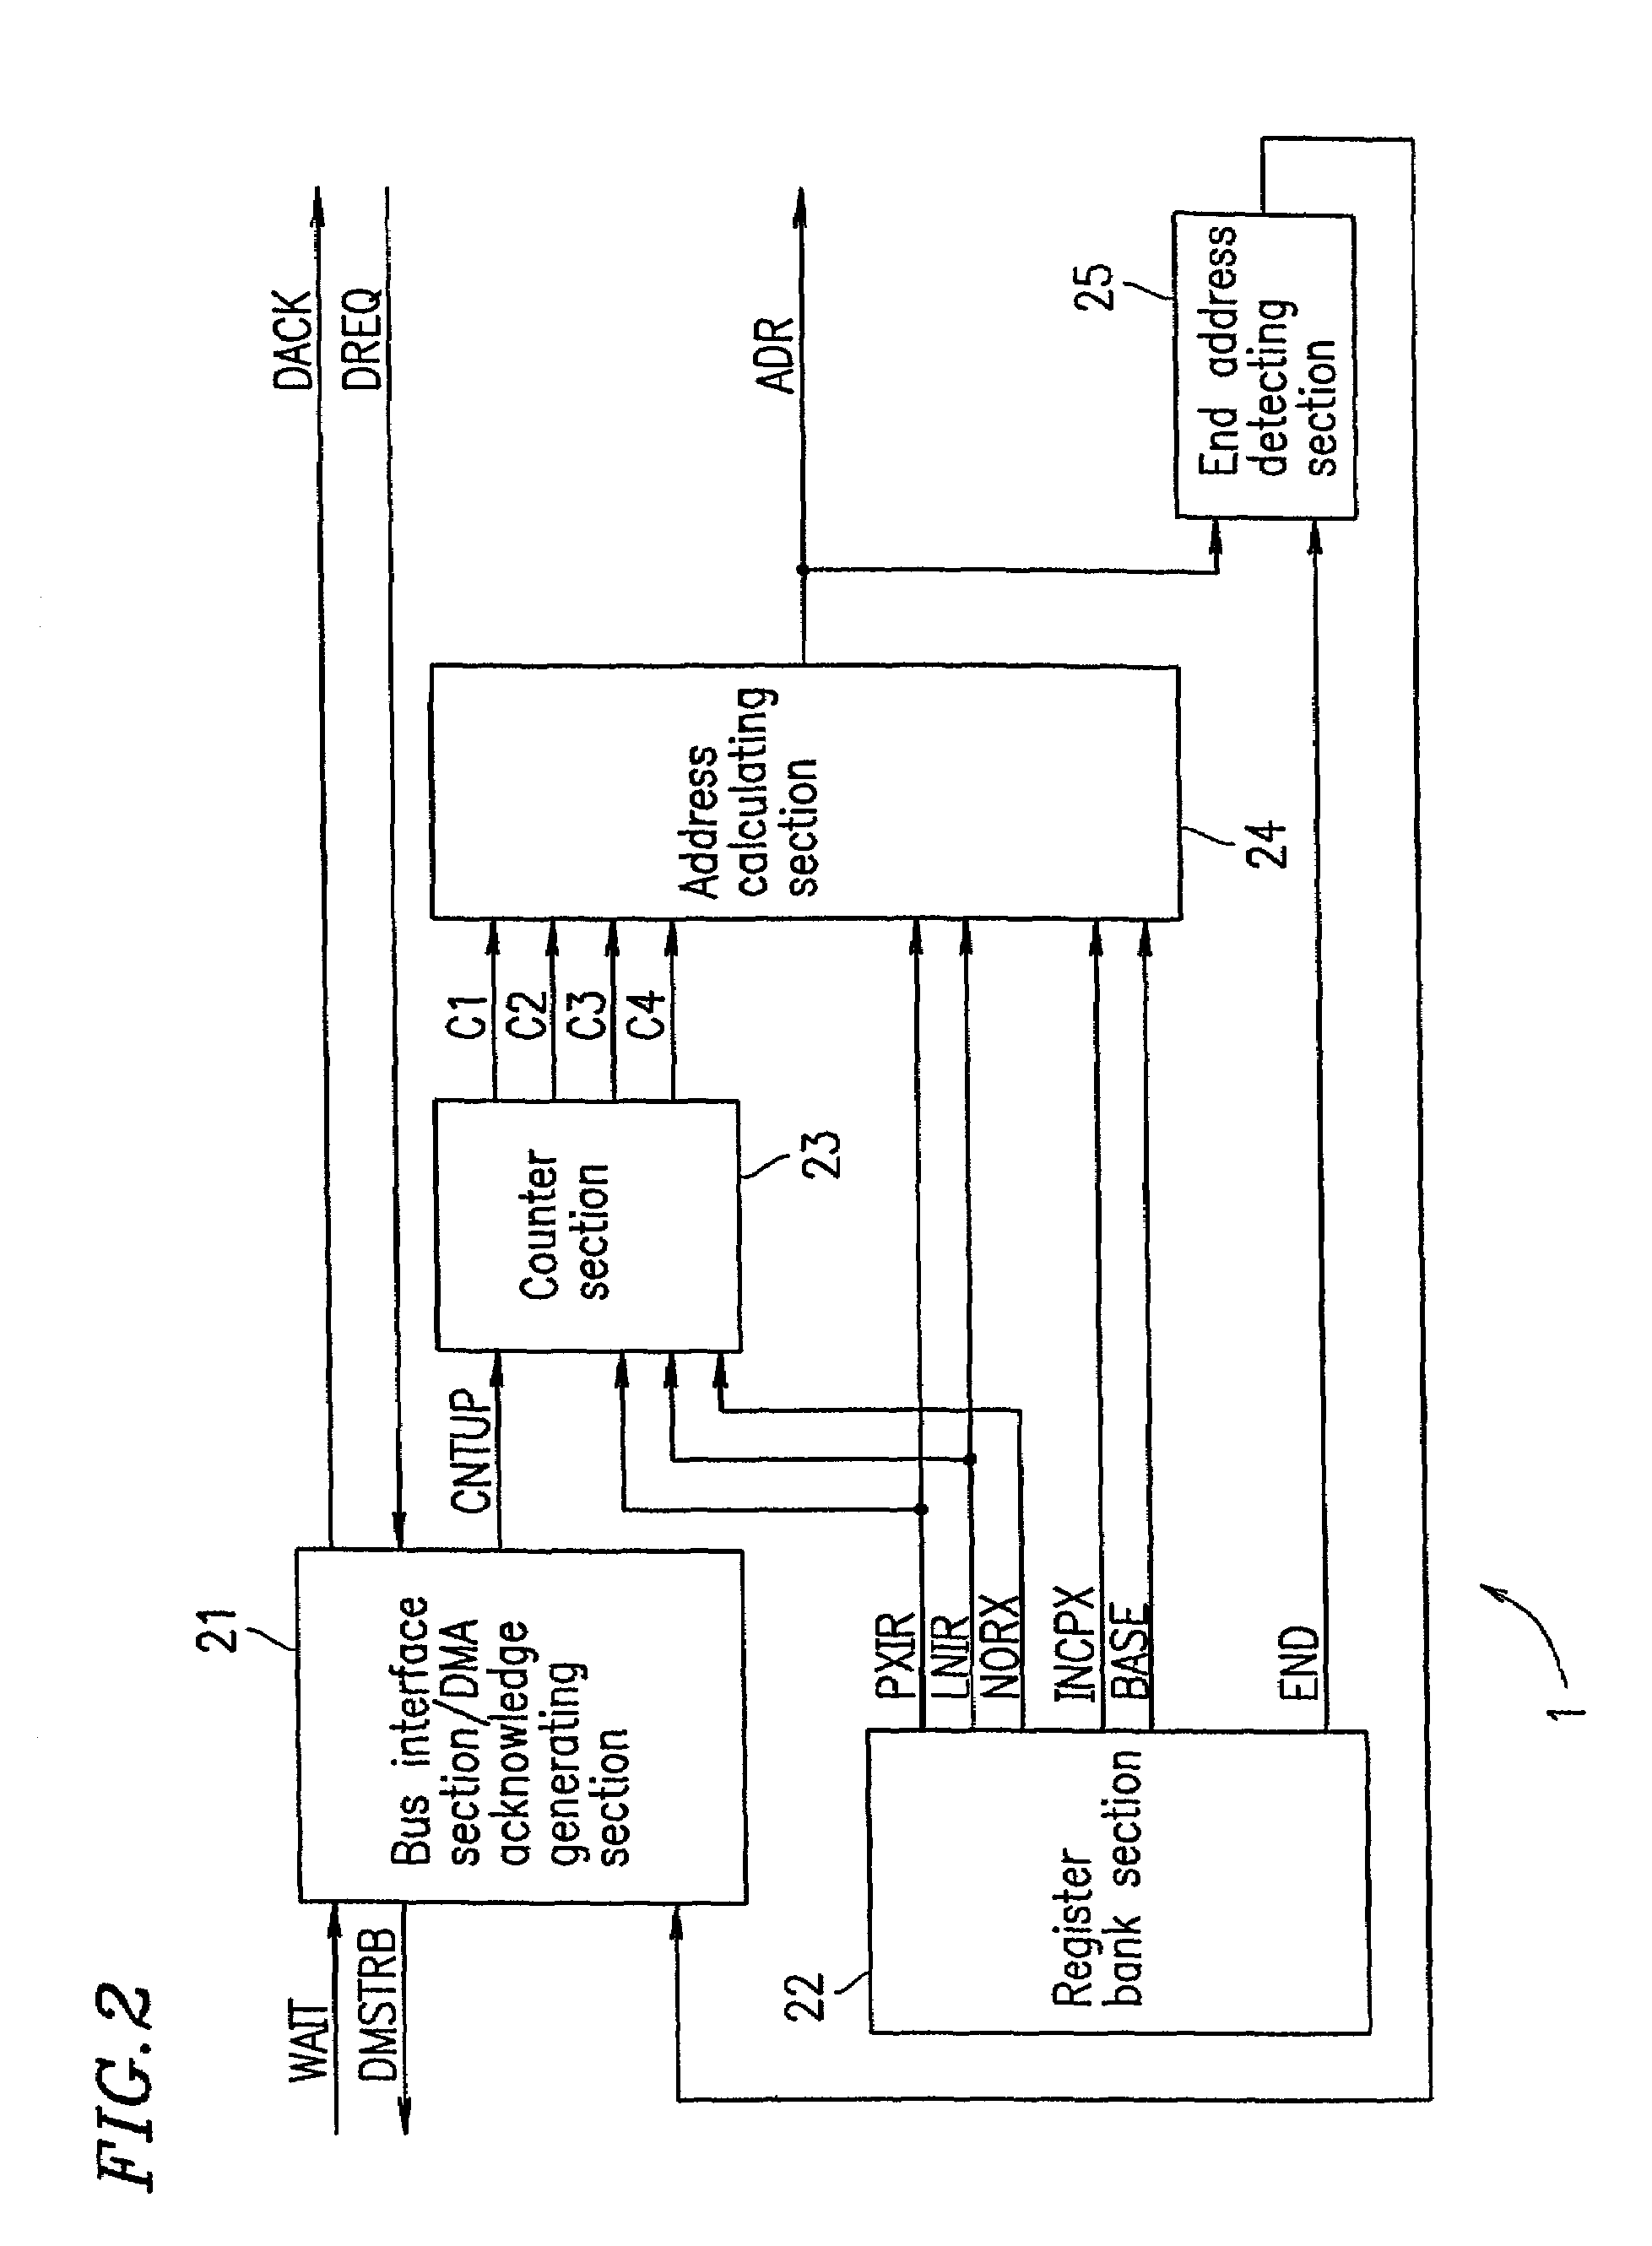 Image processing apparatus, image processing method and portable imaging apparatus